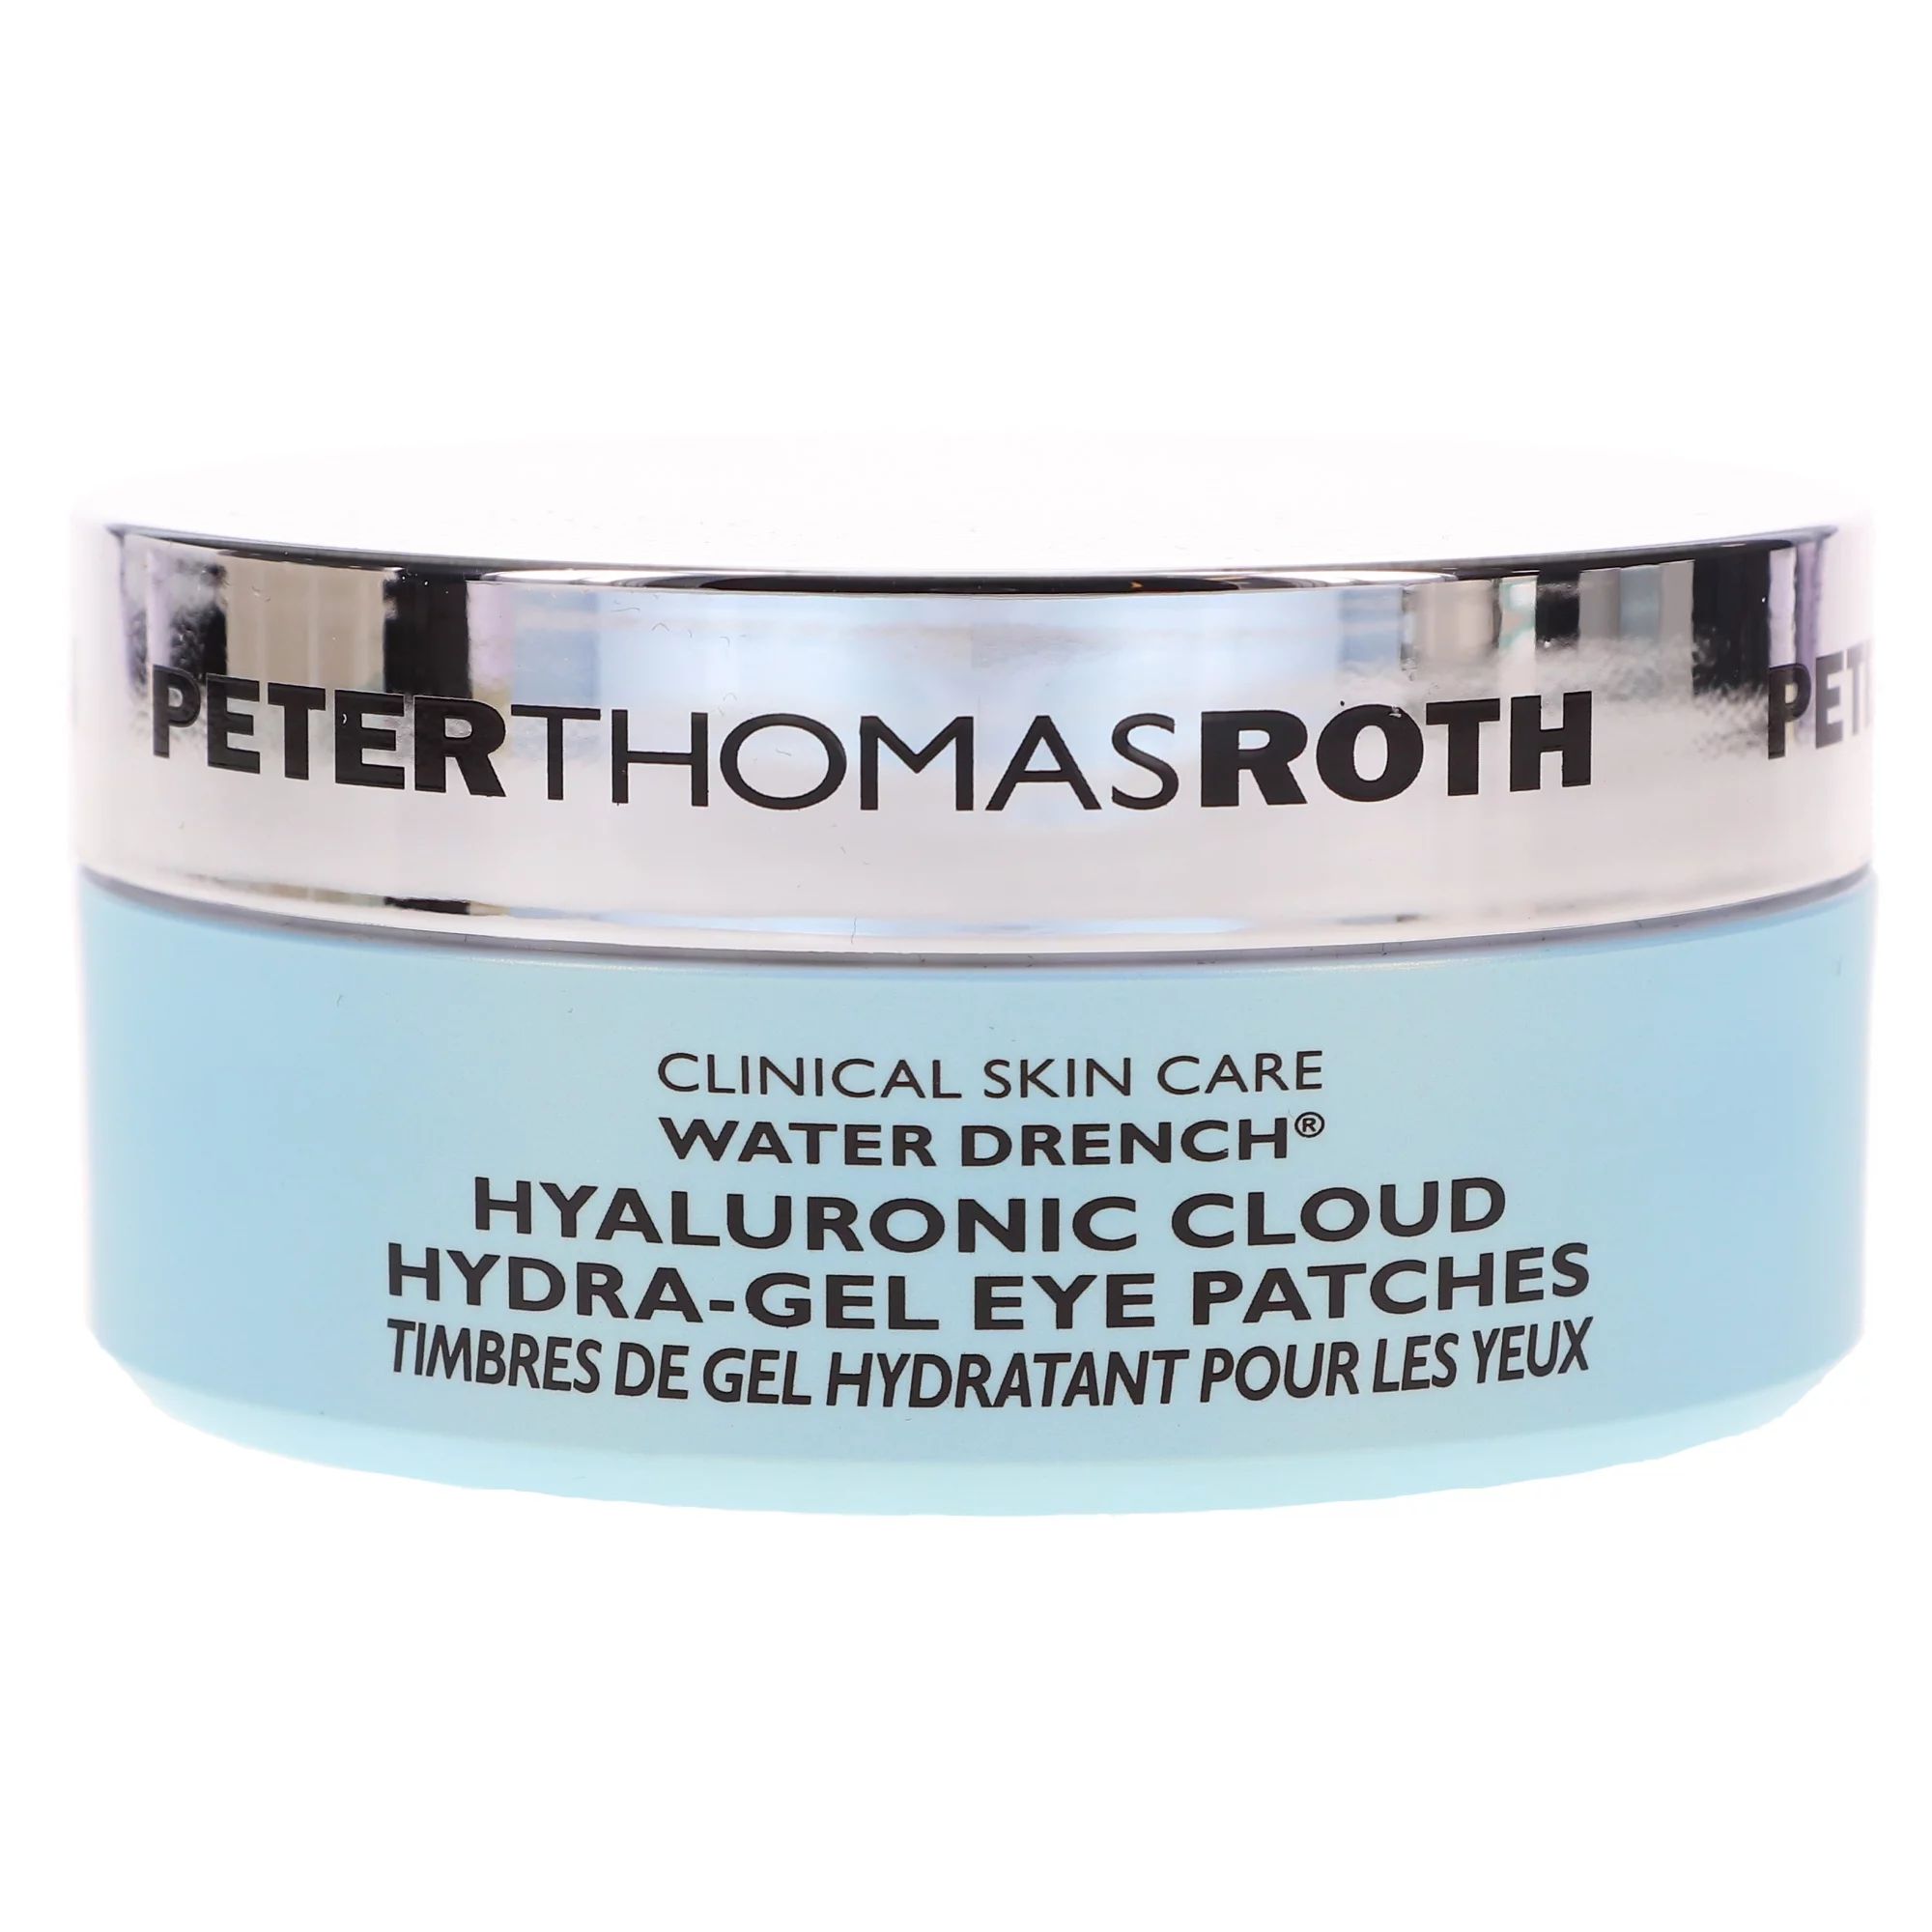 Peter Thomas Roth Water Drench Hyaluronic Cloud Hydra gel Eye Patches 60 pc | Walmart (US)